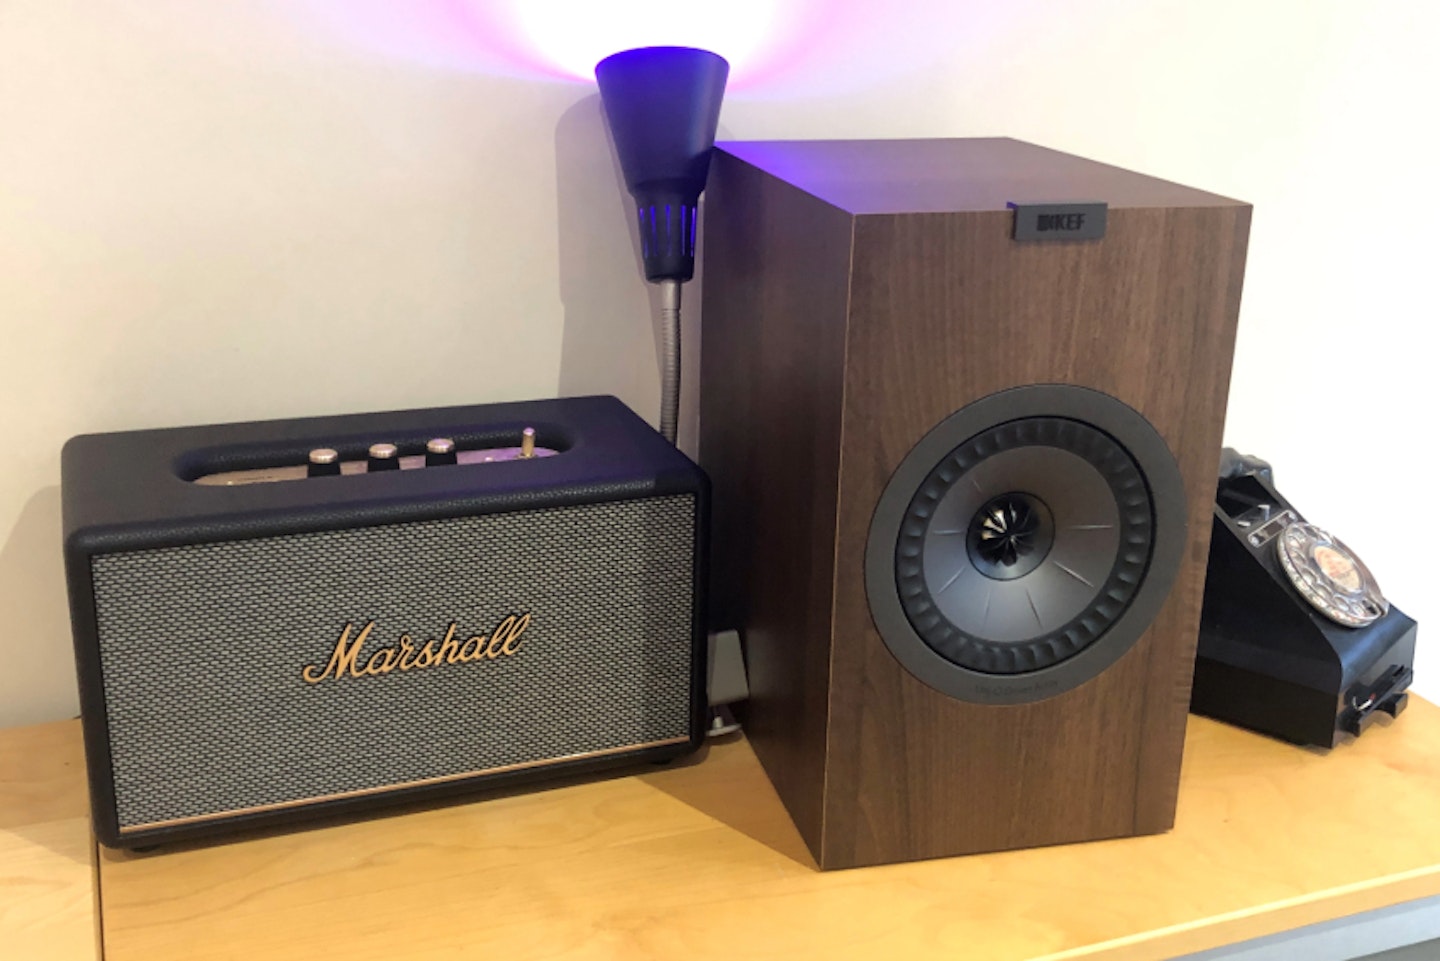 A MARSHALL BLUETOOTH SPEAKER WITH A KEF SPEAKER